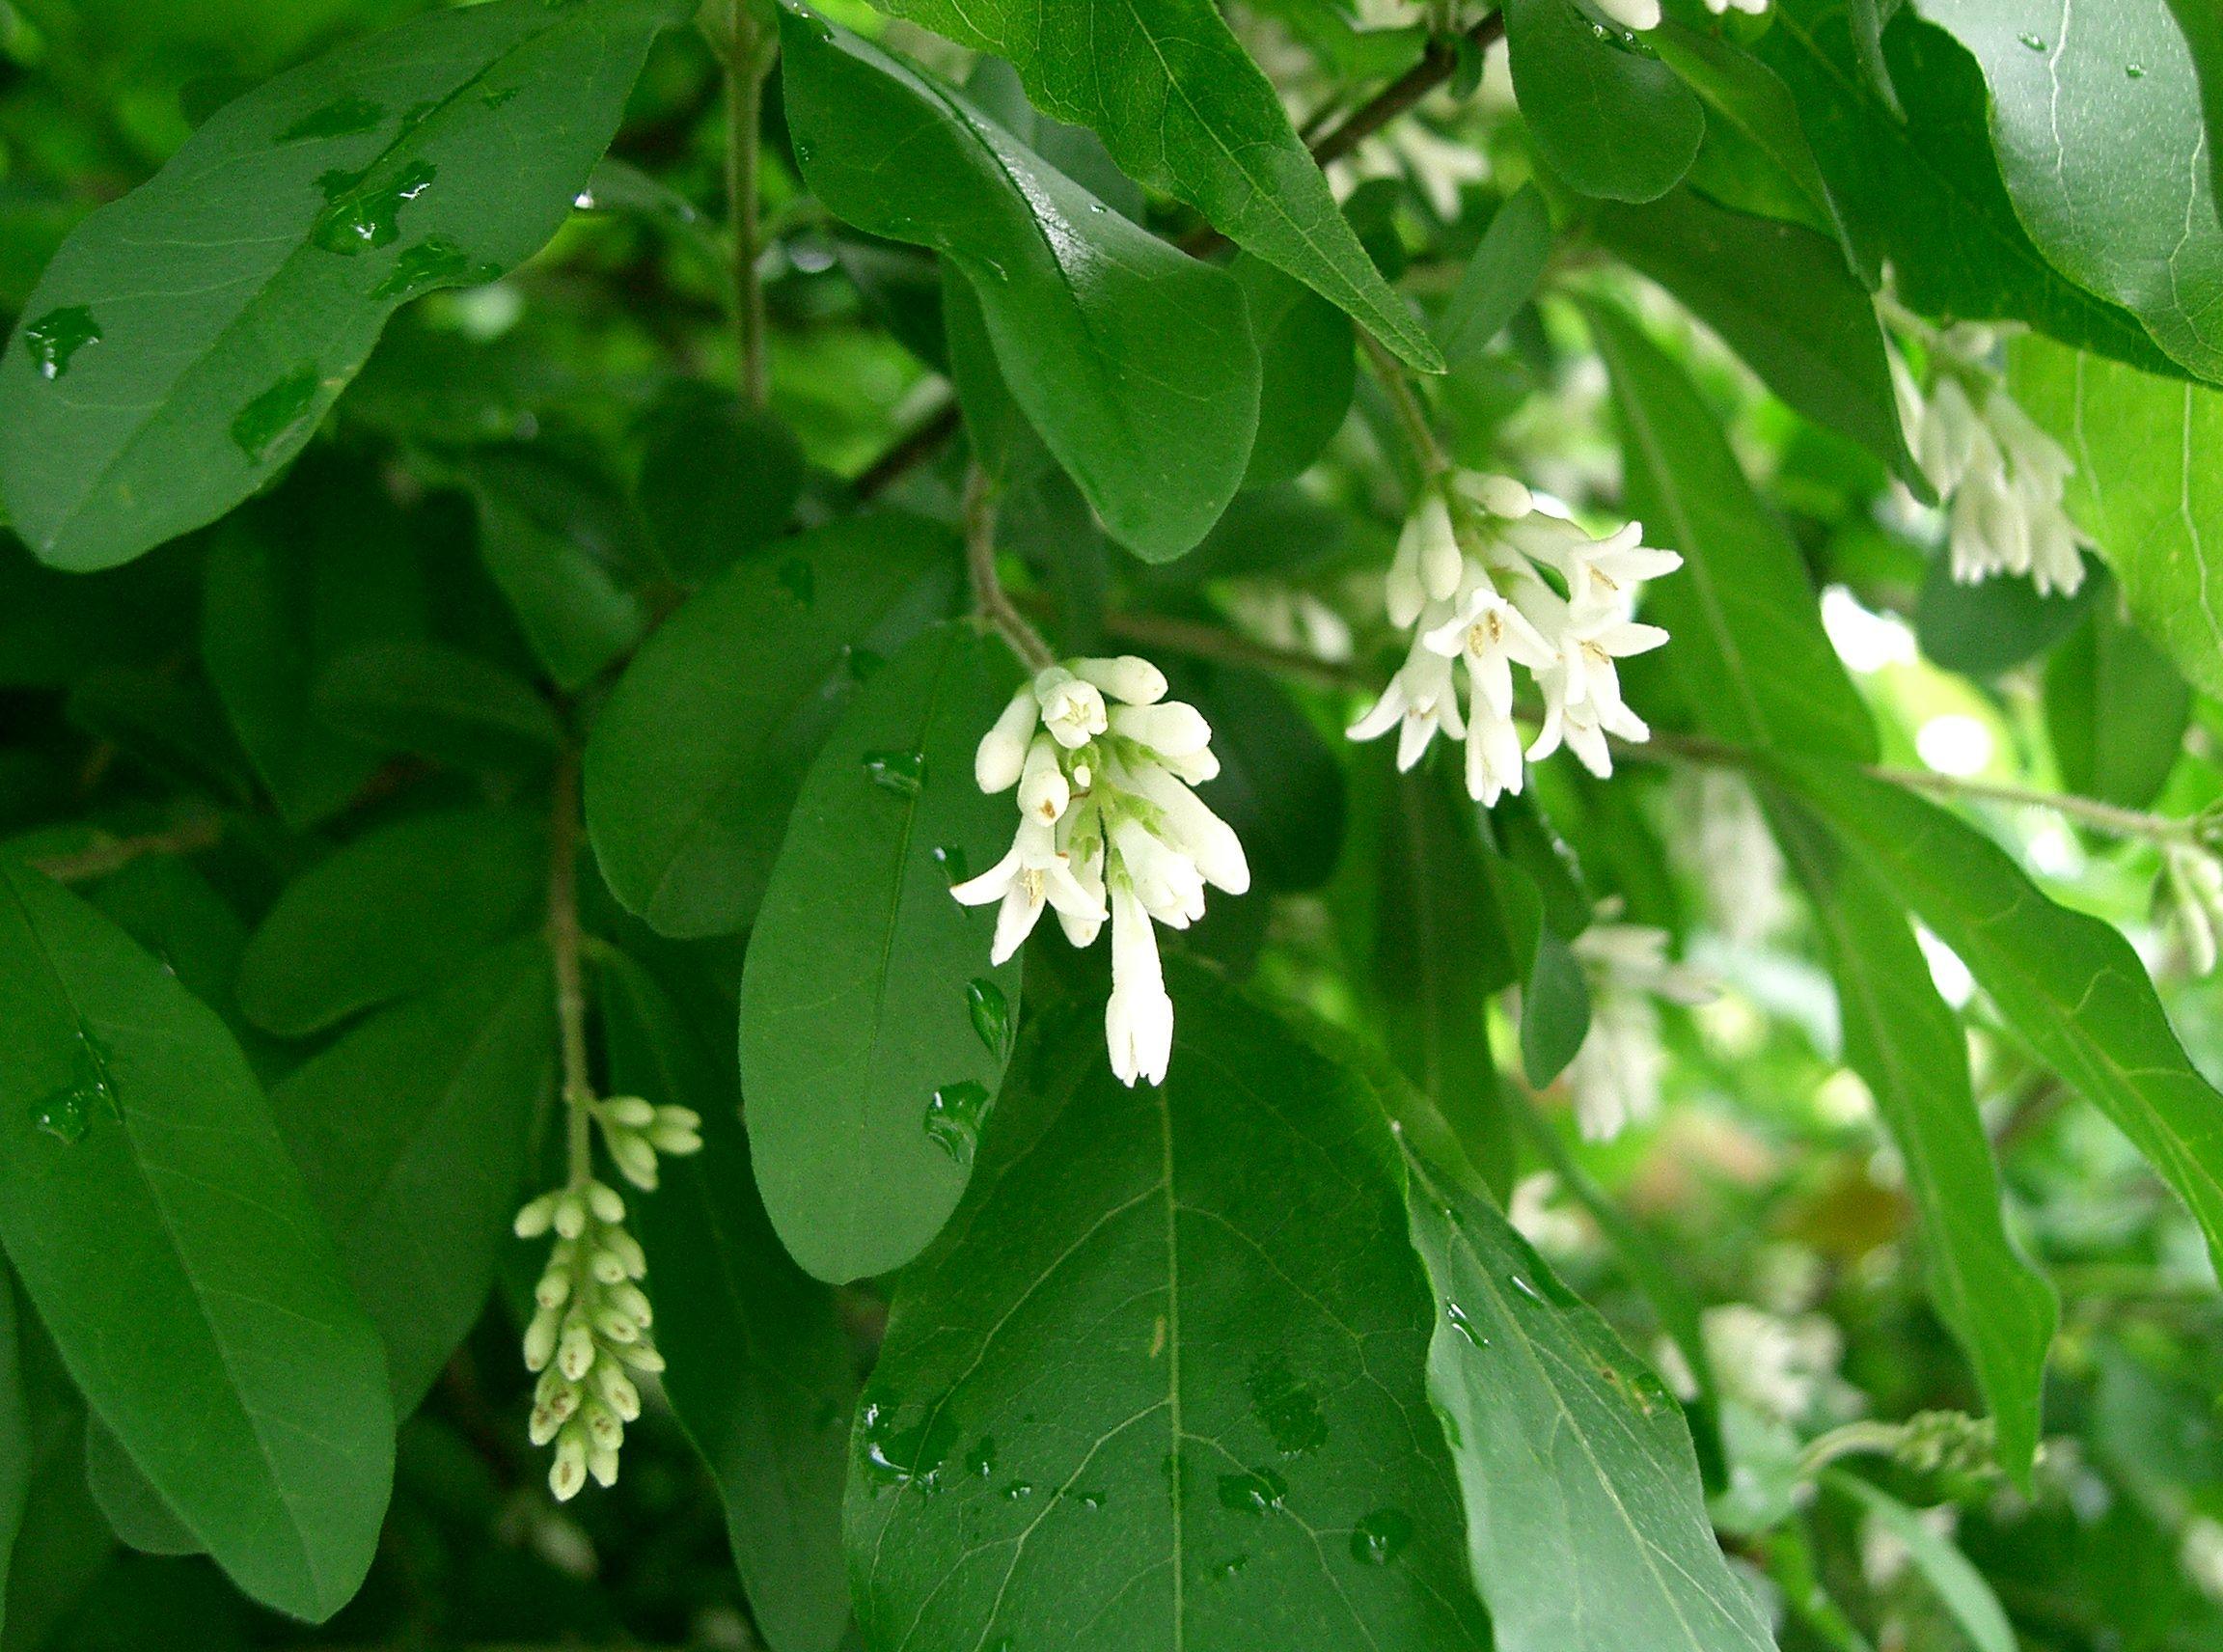 White flowers with off-white anthers, lime petioles, white hair, lime-white buds, brown stems, green leaves , yellow midrib and veins.